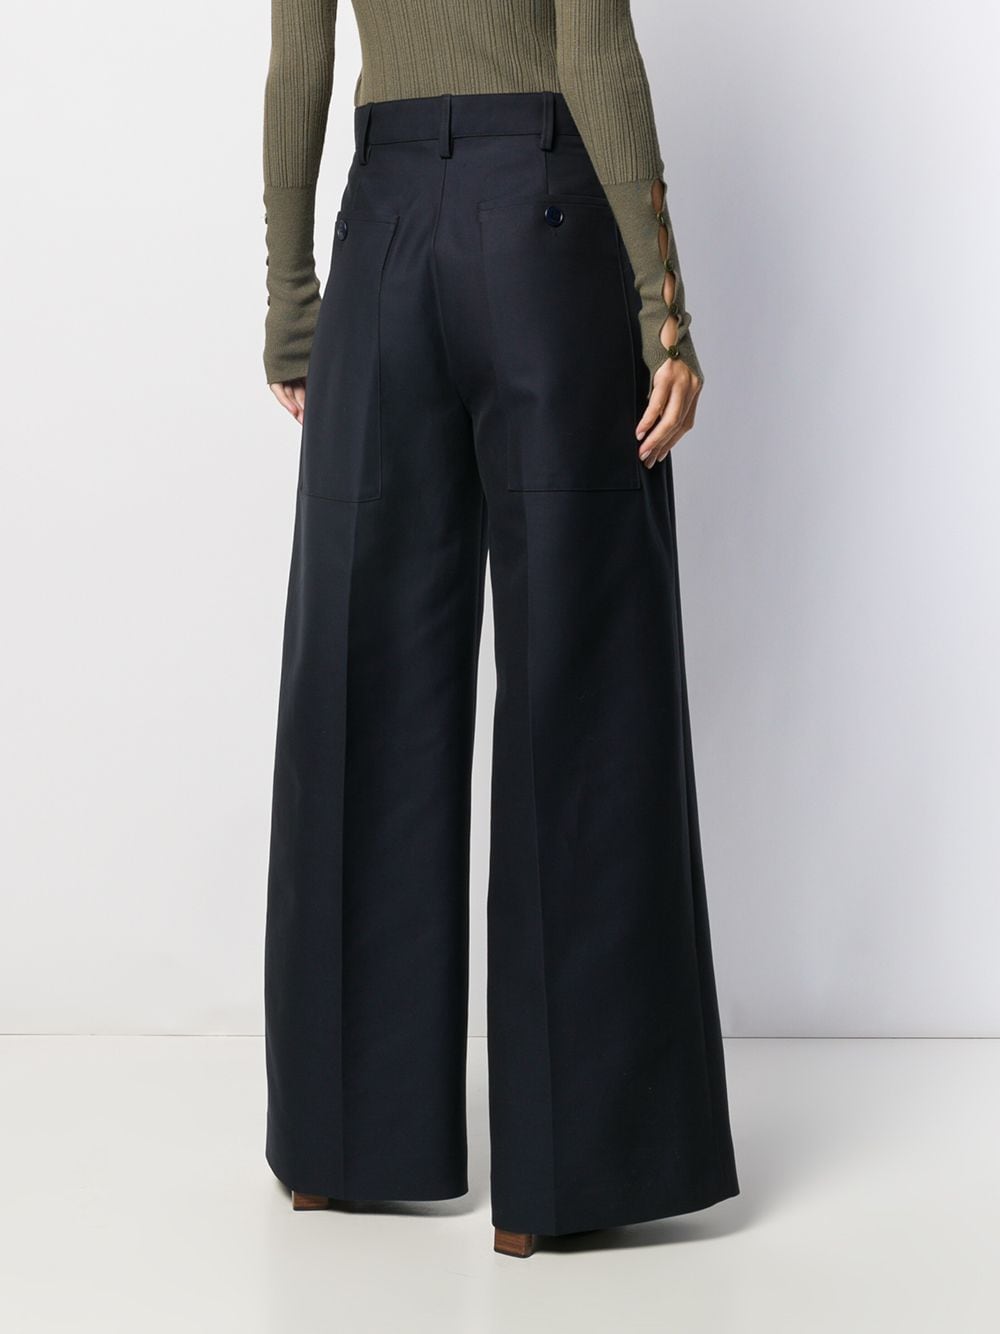 Jacquemus Pleated Details Palazzo Trousers - Farfetch